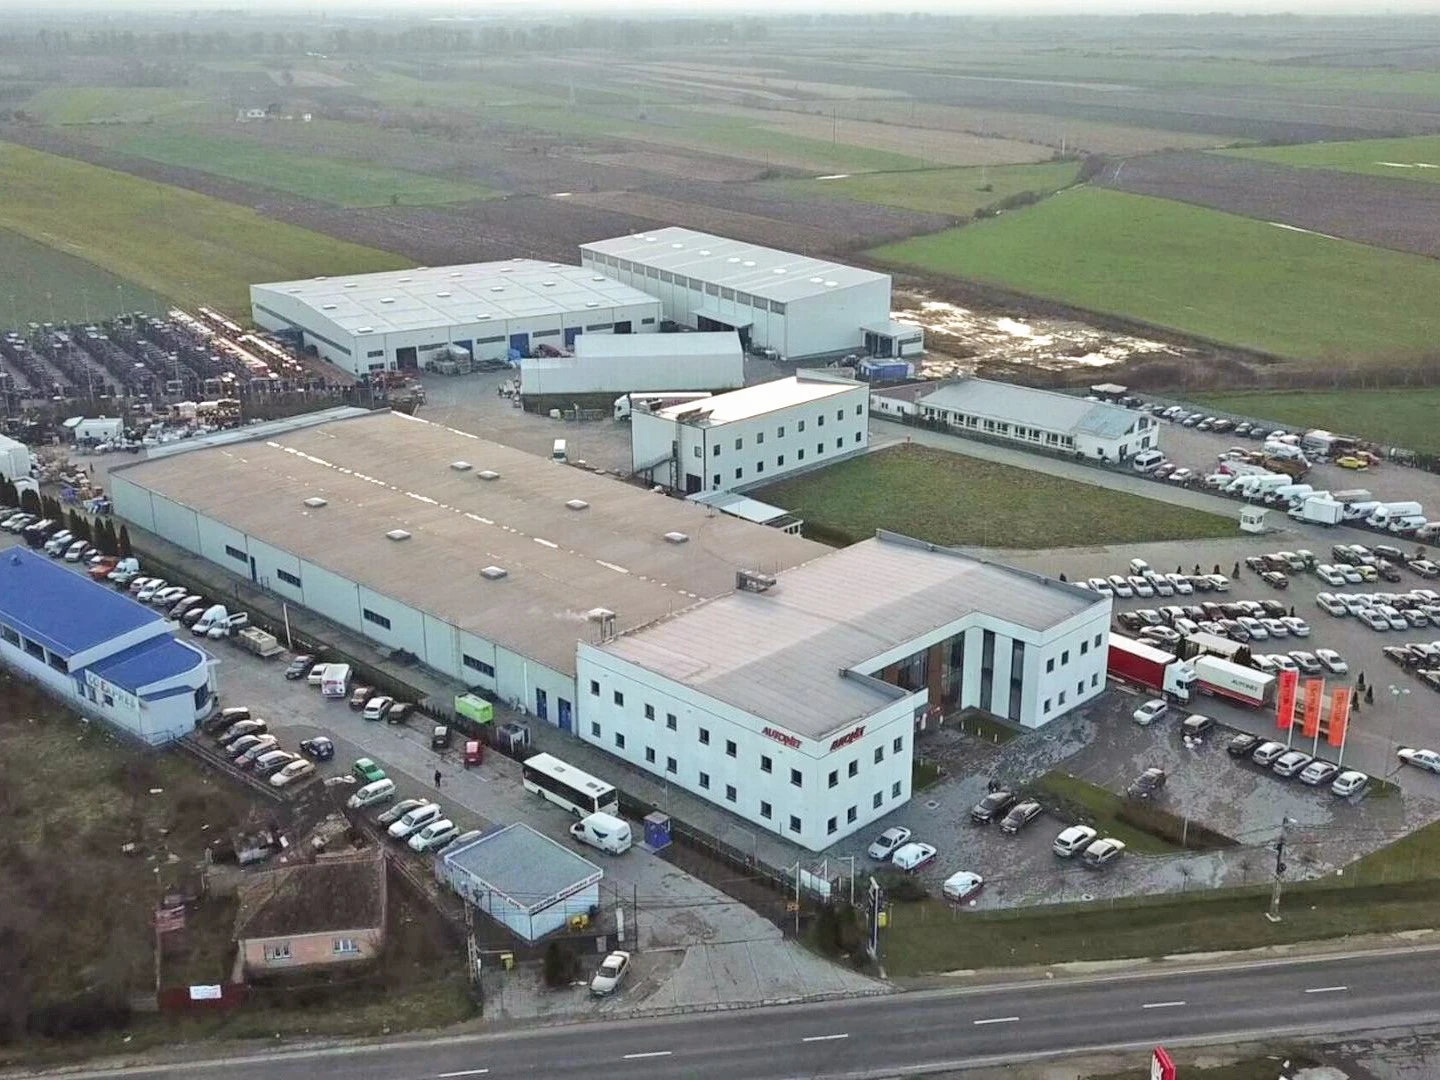 The Largest Supplier of Auto Materials in Romania, Autonet Group, Opted for the AxxonSoft VMS